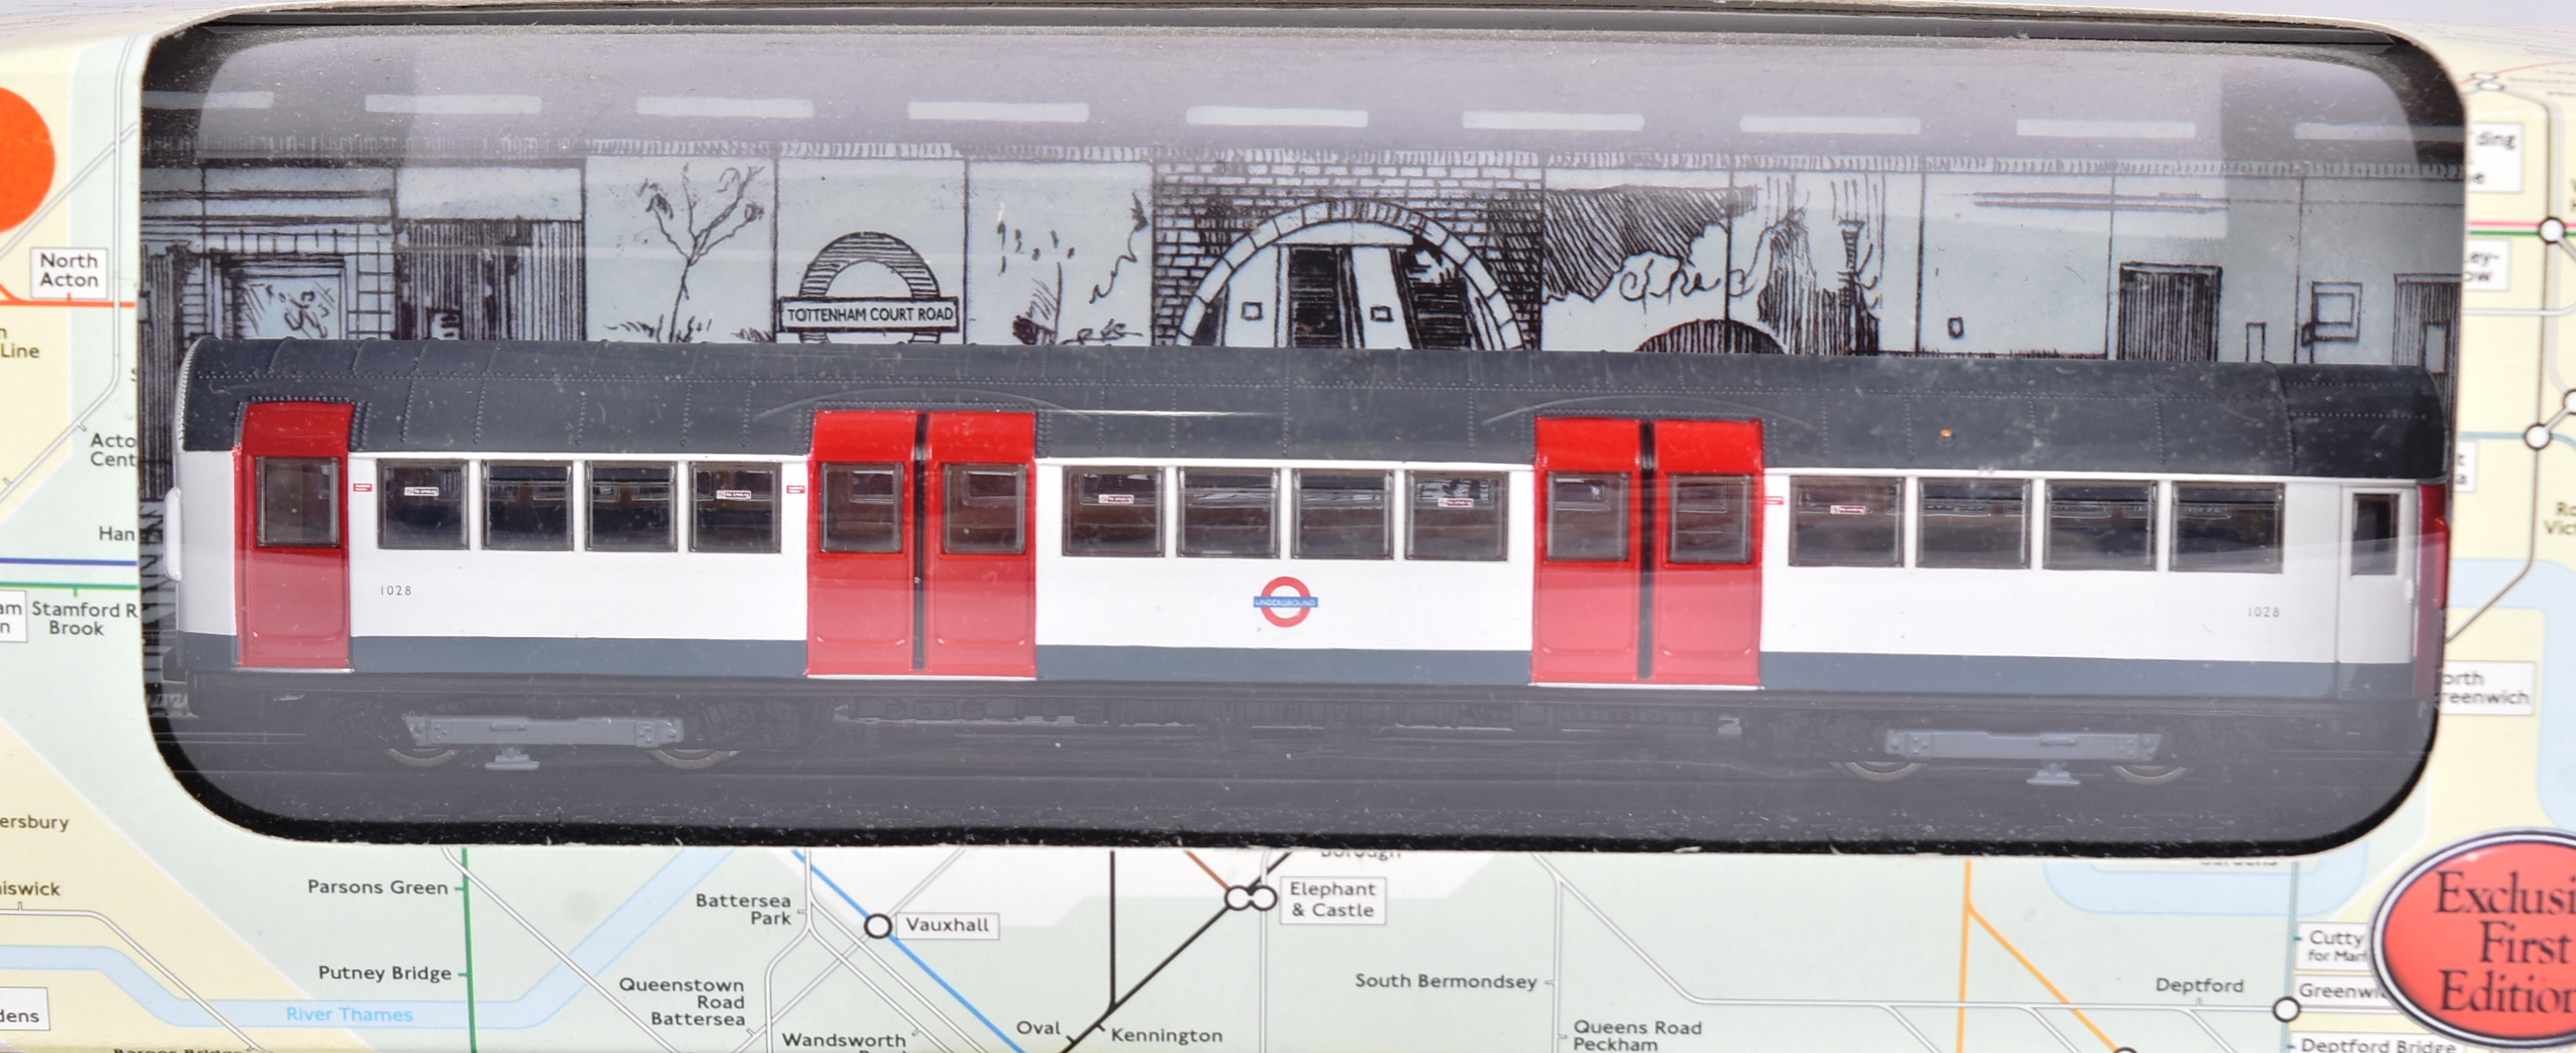 THREE GILBOW LONDON TUBE STOCK CARRIAGES MODEL DIECAST 1/76 SCALE - Image 2 of 5